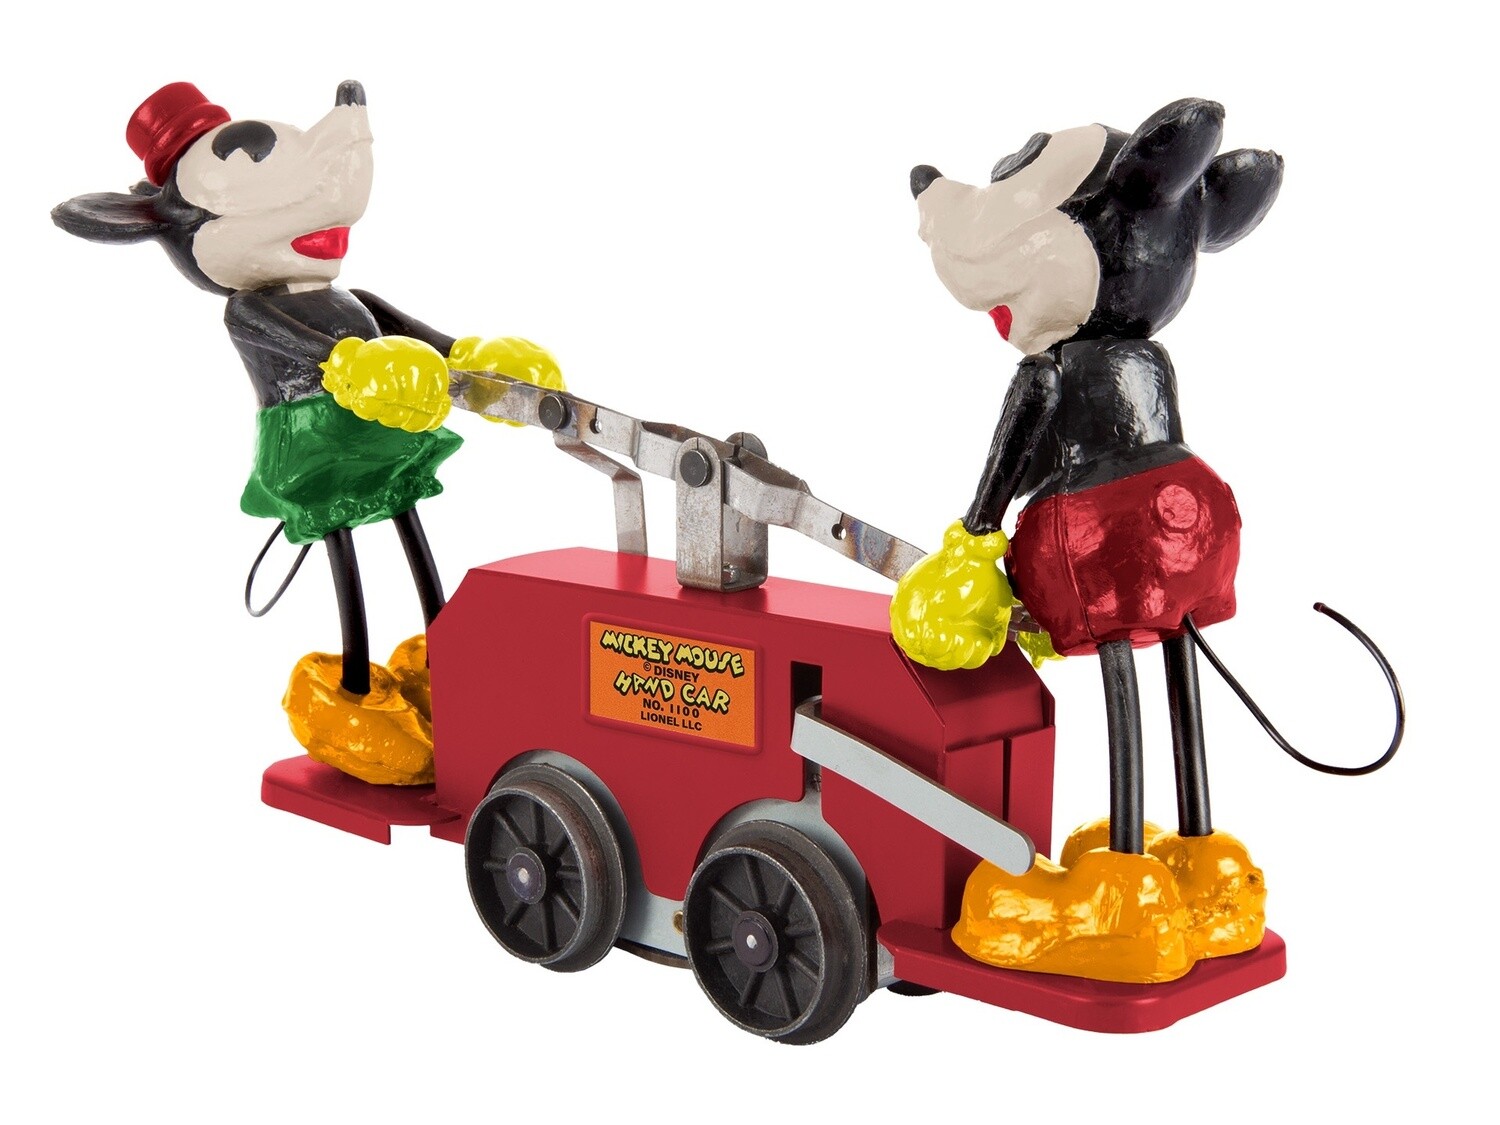 DISNEY'S MICKEY MOUSE AND MINNIE MOUSE HANDCAR - RED